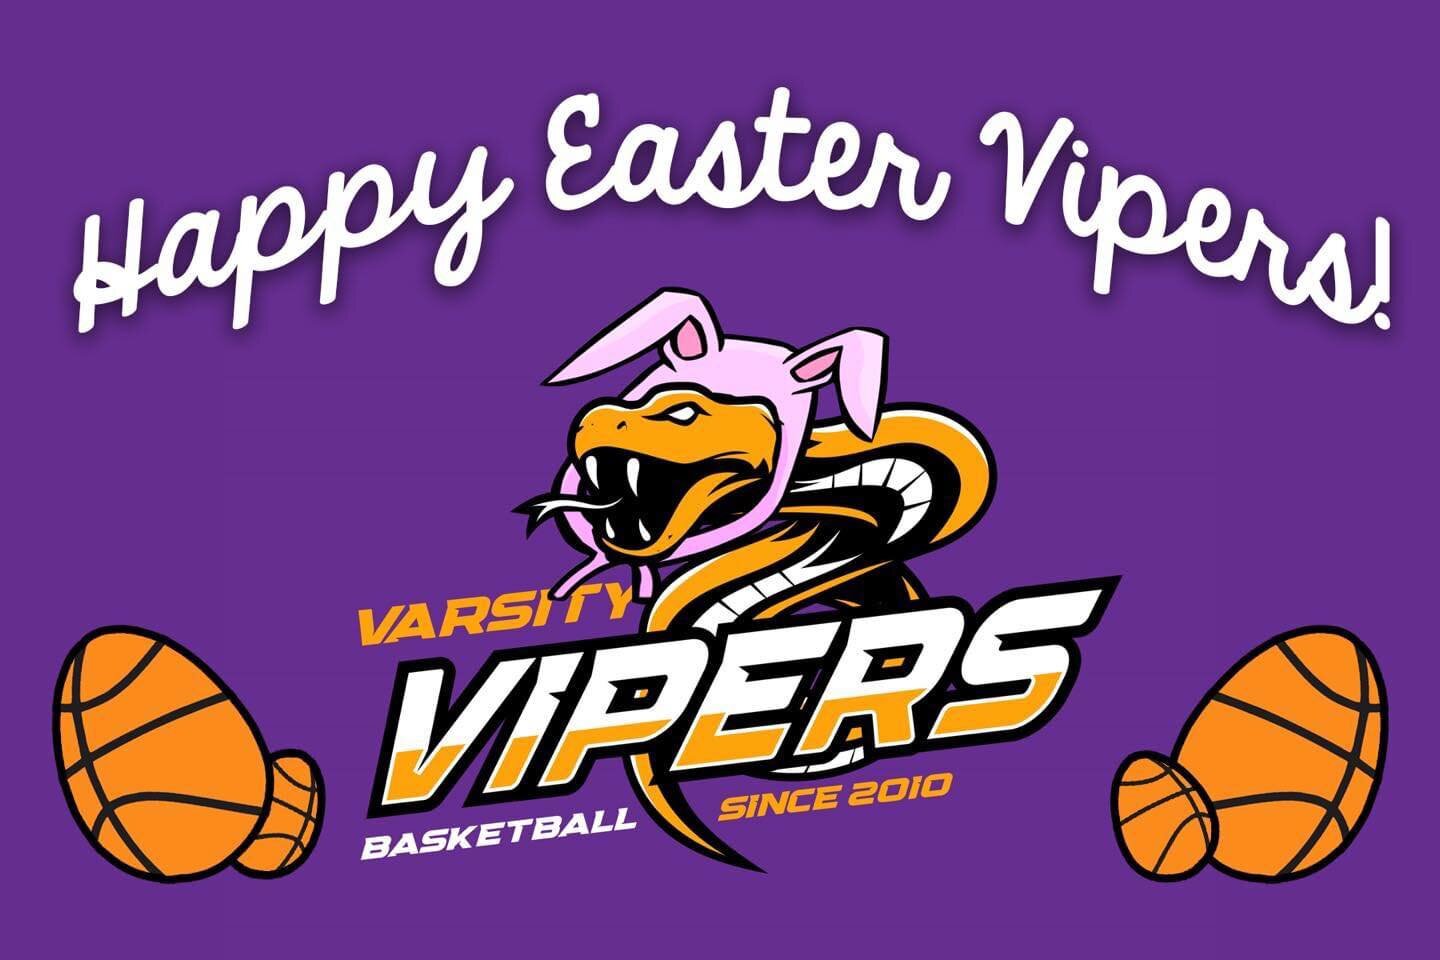 🏀🐣 HAPPY EASTER 🐰🏀

From all of us here at the Varsity Vipers we wish you a happy and safe Easter holiday with your friends and family!